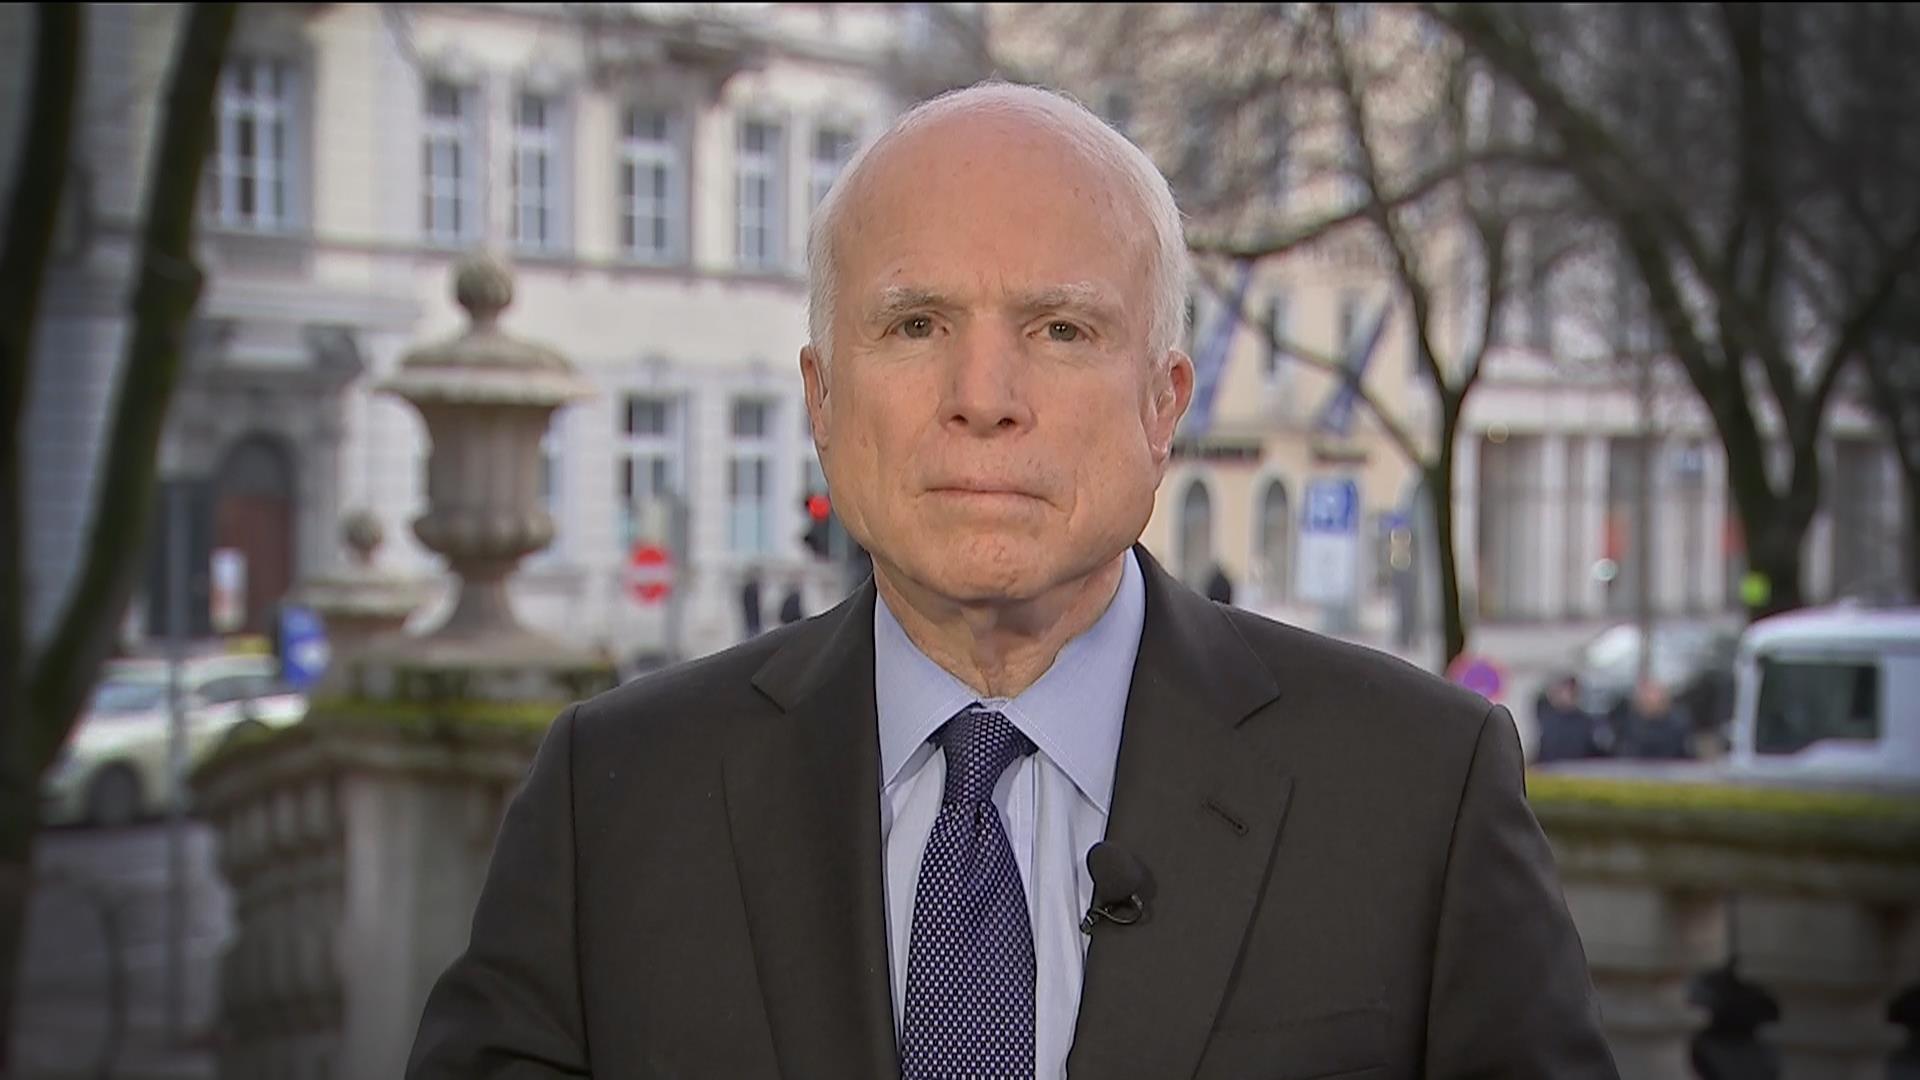 Full McCain Interview: 'I Worry About the President's Understanding' of Some Issues